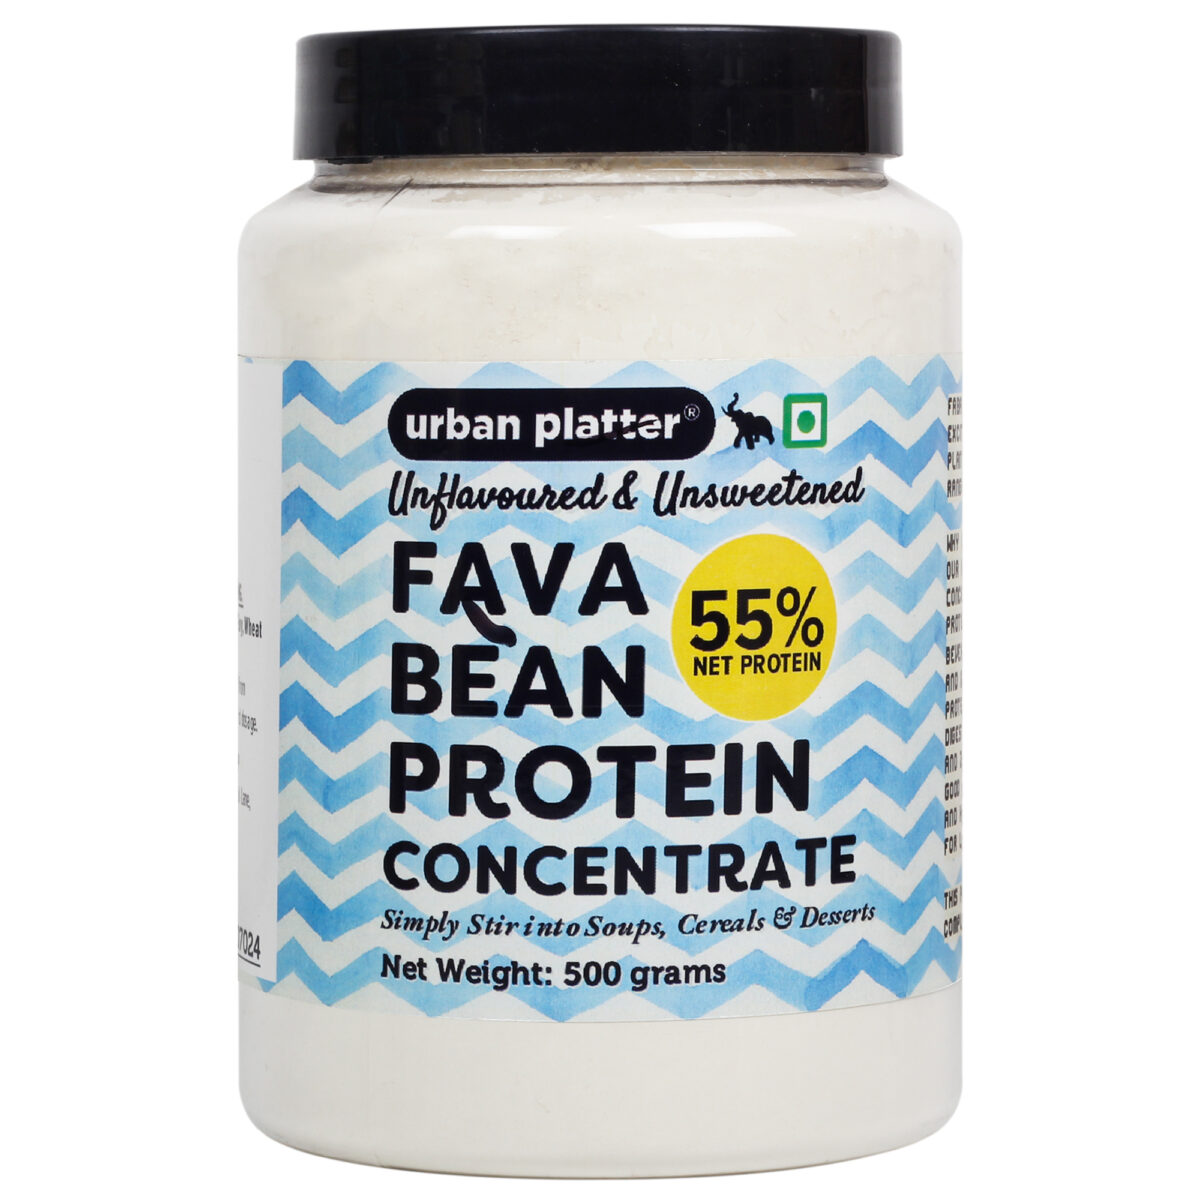 Urban Platter Unsweetened Fava Bean Protein Concentrate, 500g (55% Protein) Whey Urban Platter